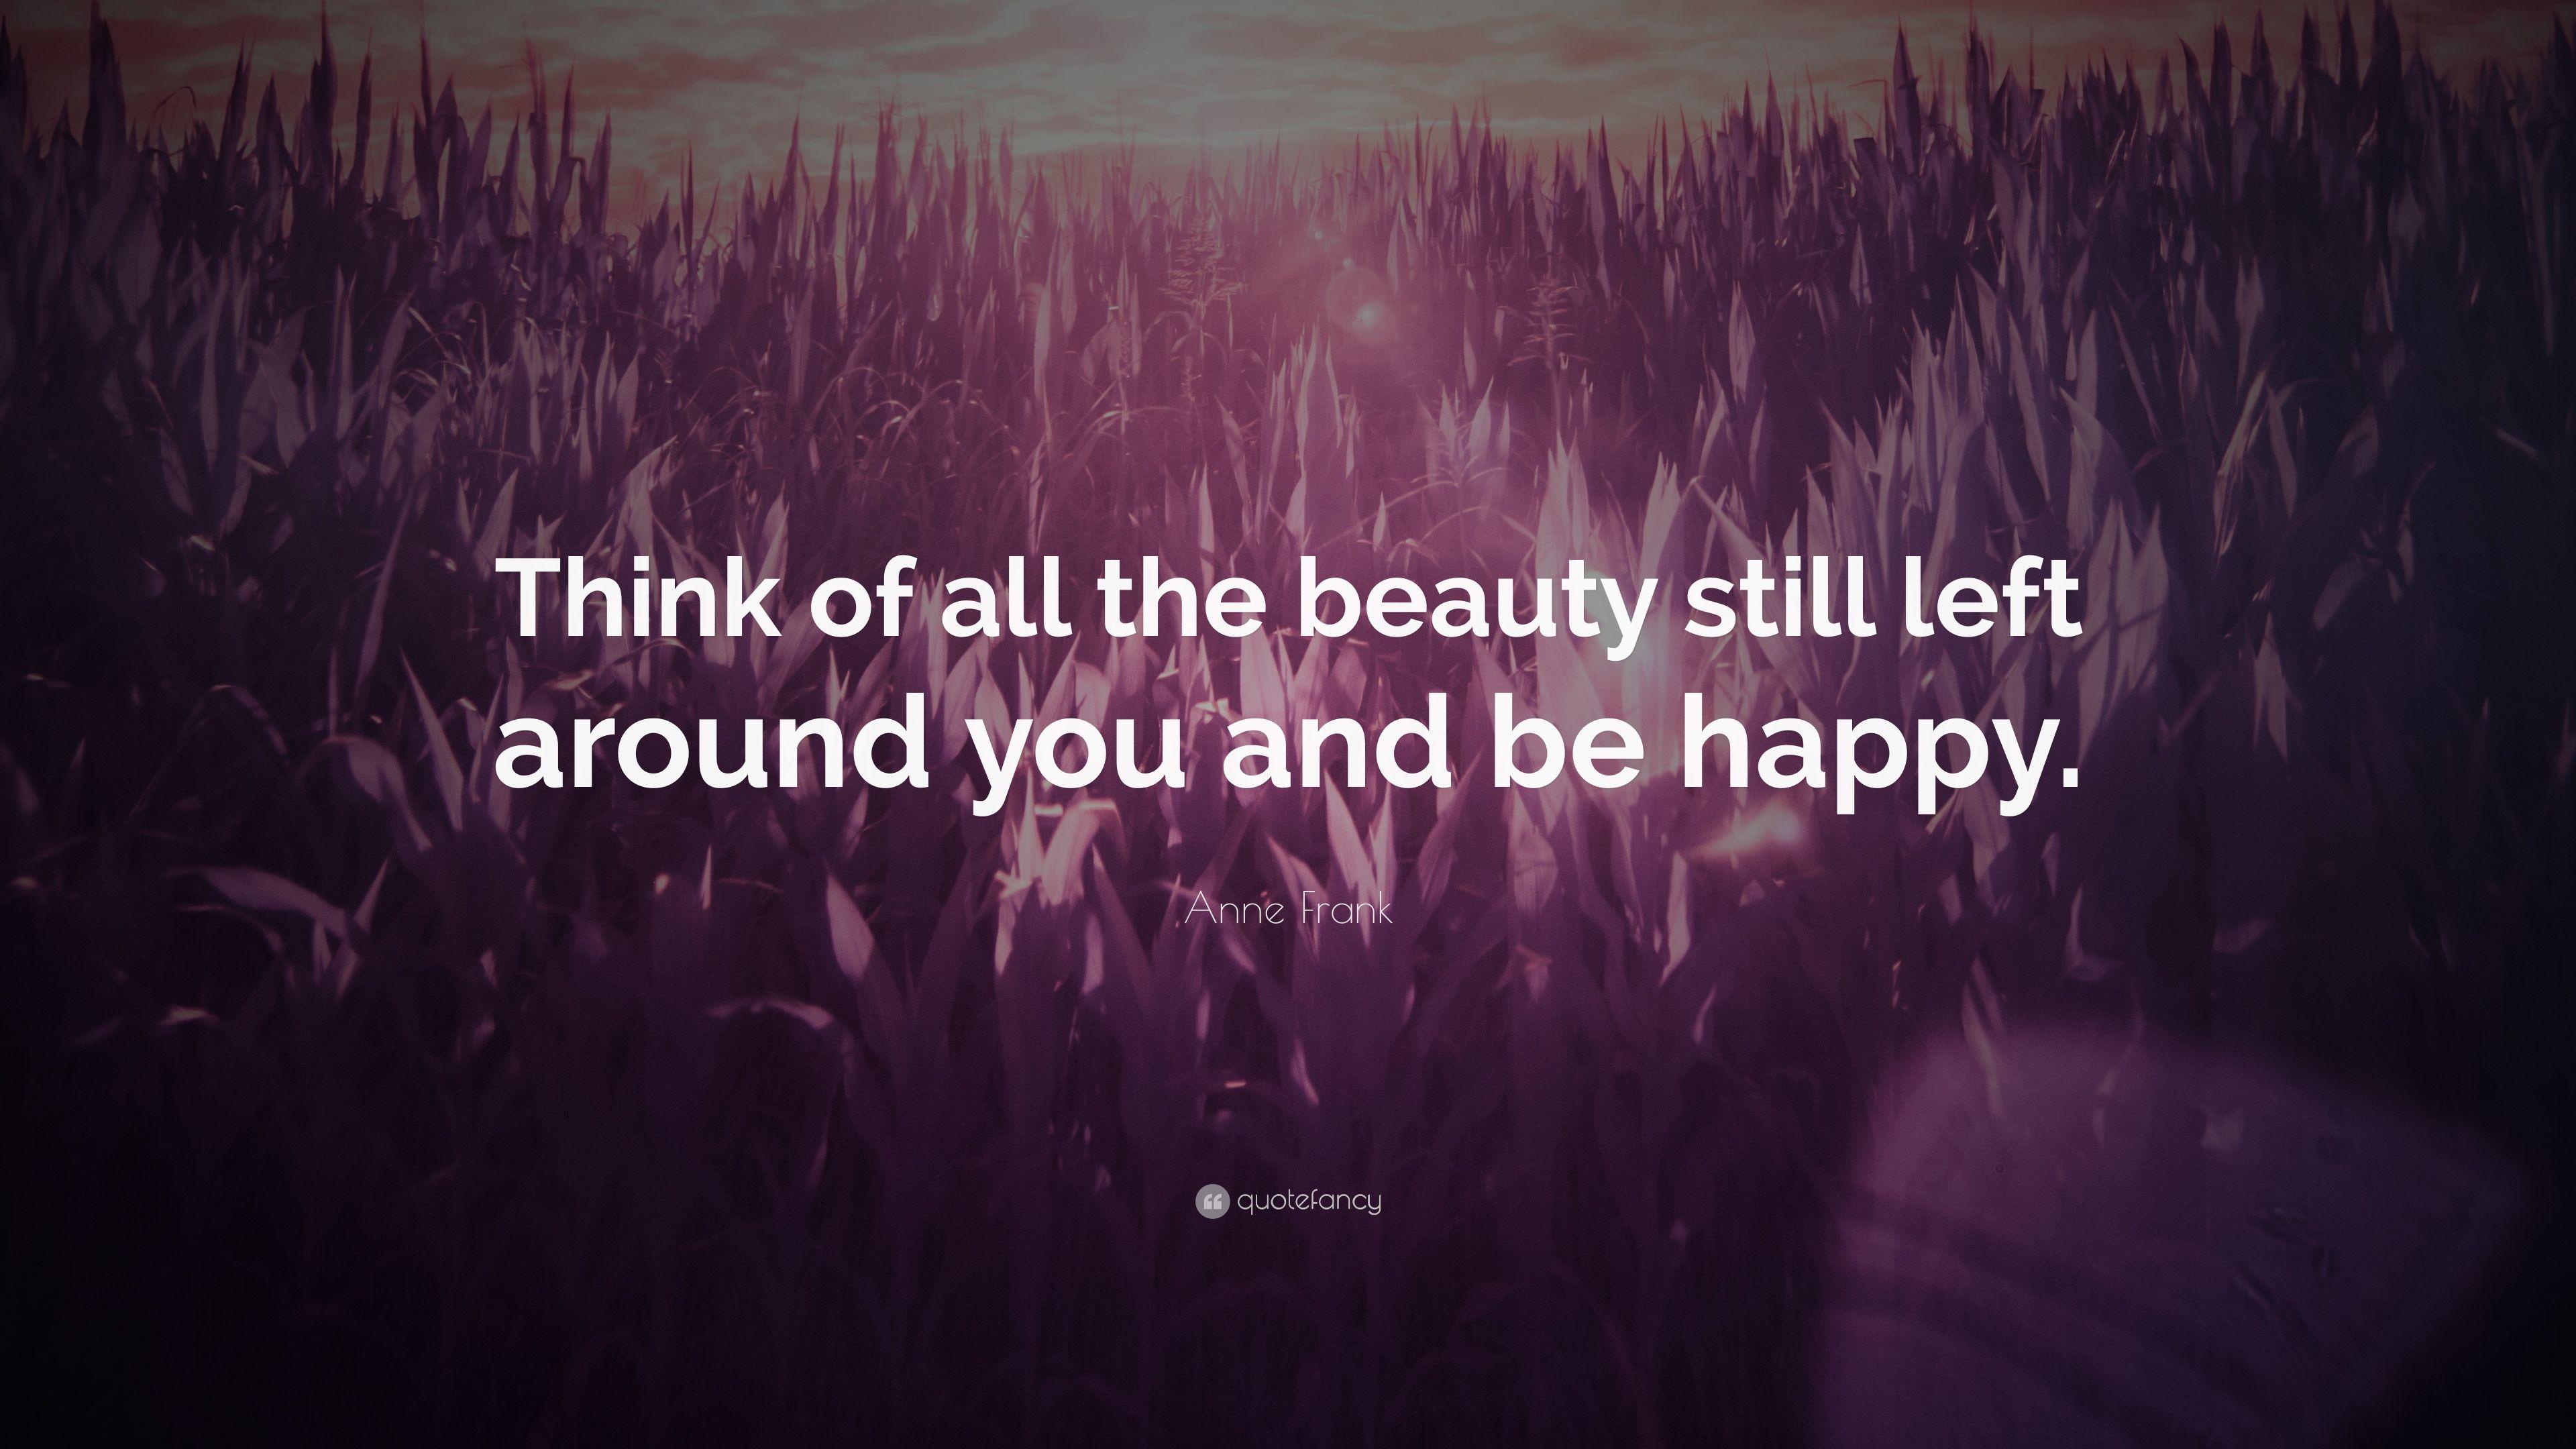 Anne Frank Quote: “Think of all the beauty still left around you